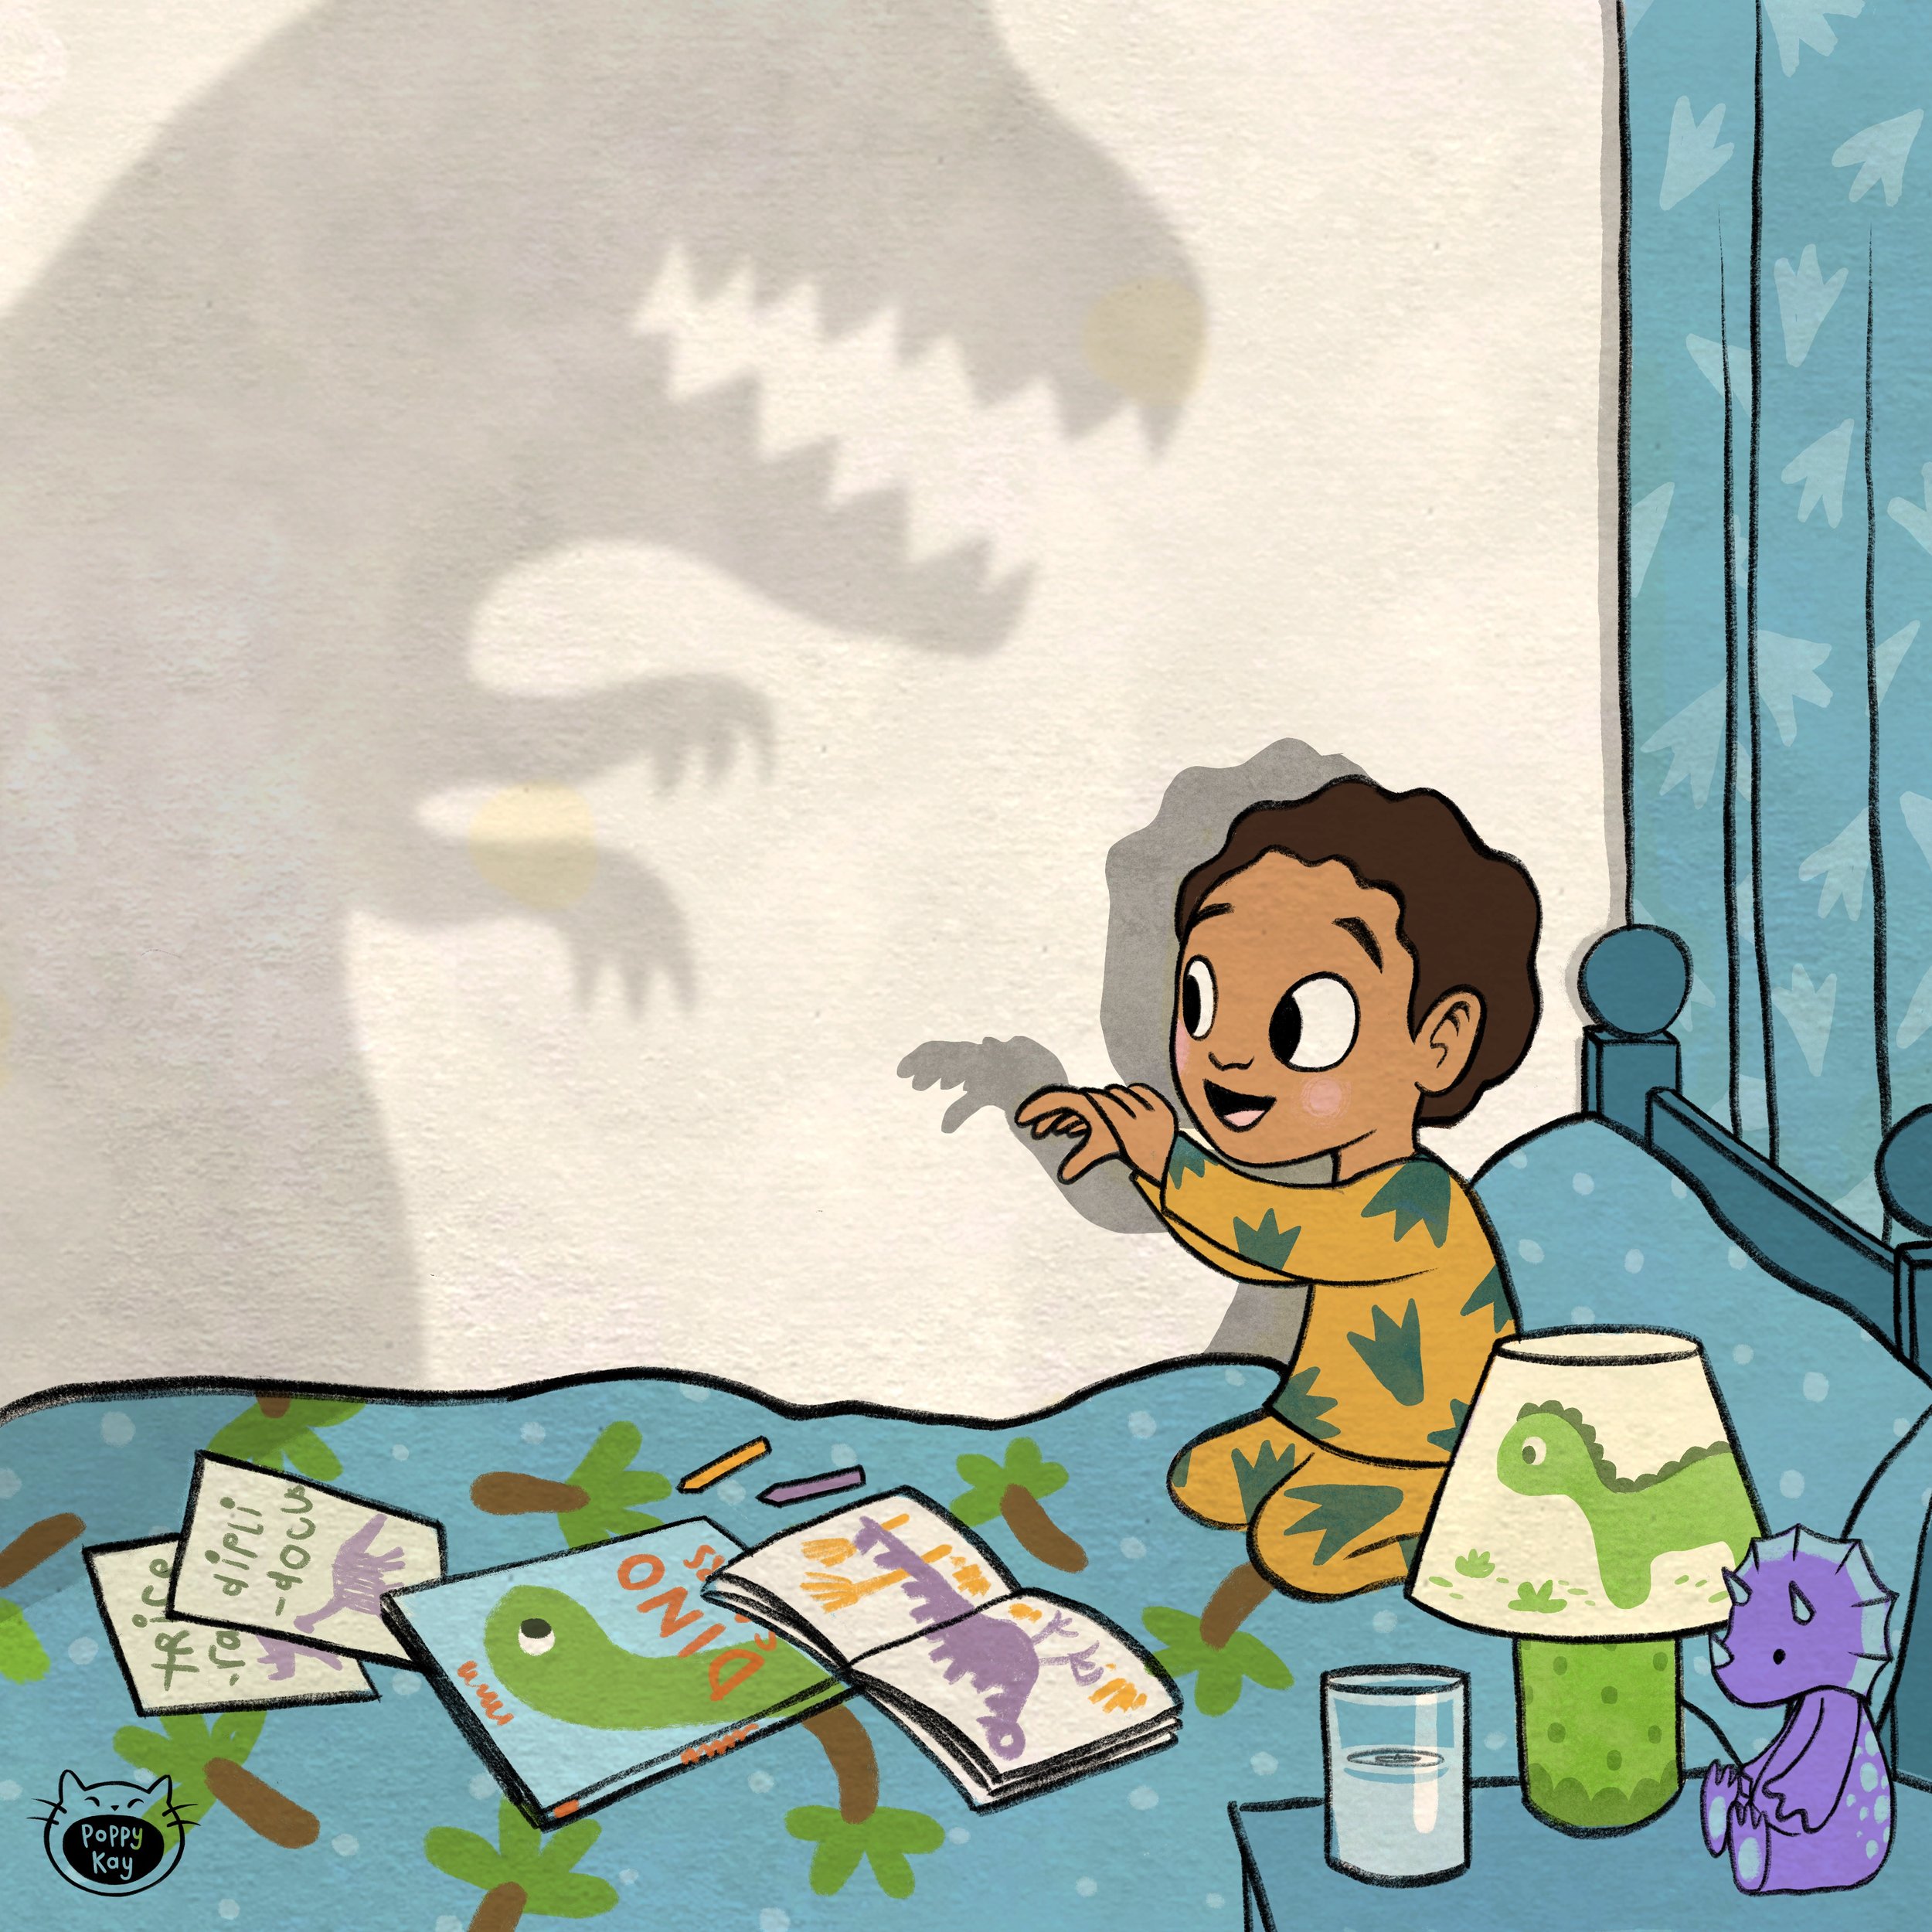 Dinosaur Bedtime - based on a drawing by Tim Budgen